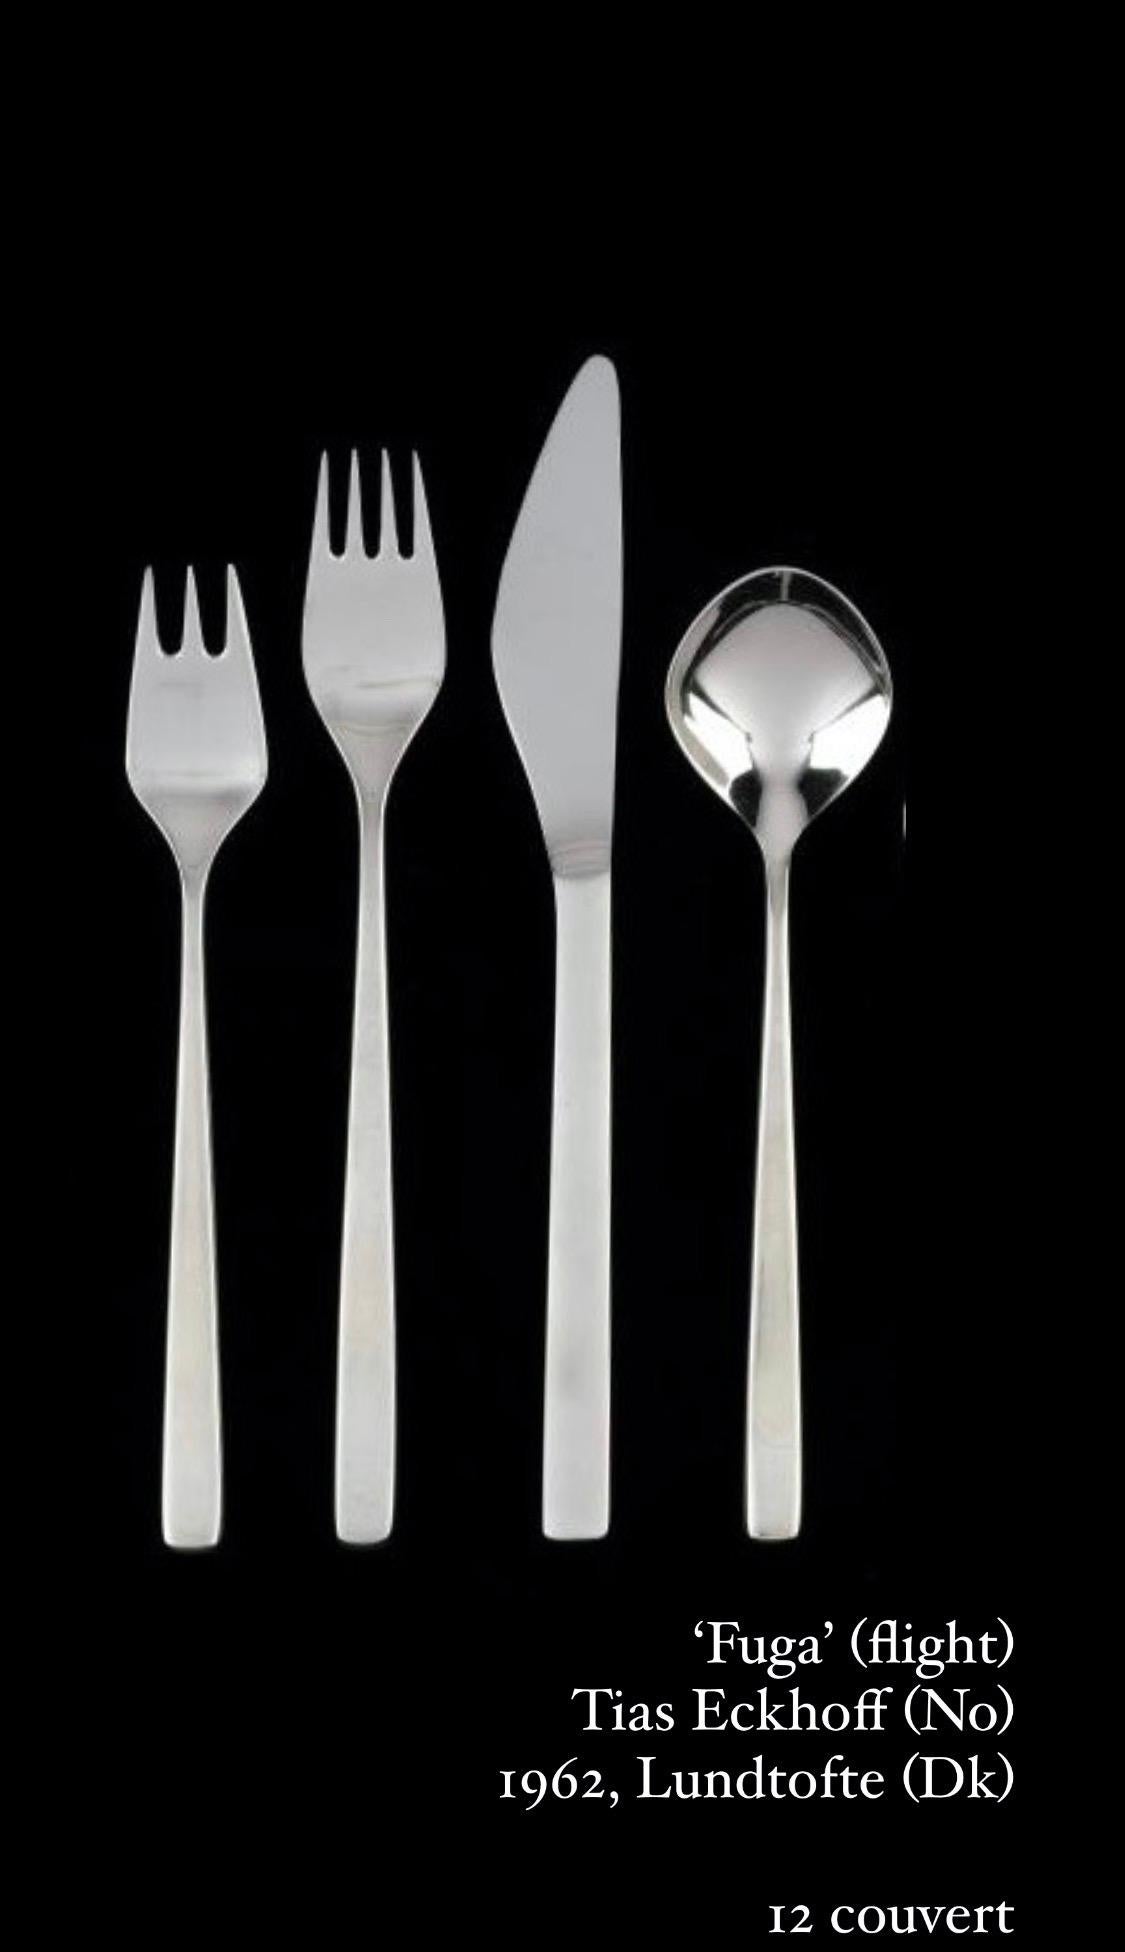 Scandinavian Midcentury Modern Flatware design “Fuga” by Norwegian designer Tias Eckhoff for Lundtofte, Denmark 1958-62. Later Gense.

12 place settings, 54 parts - not all shown !!
Stainless steel. 
Individually marked both Lundtofte and